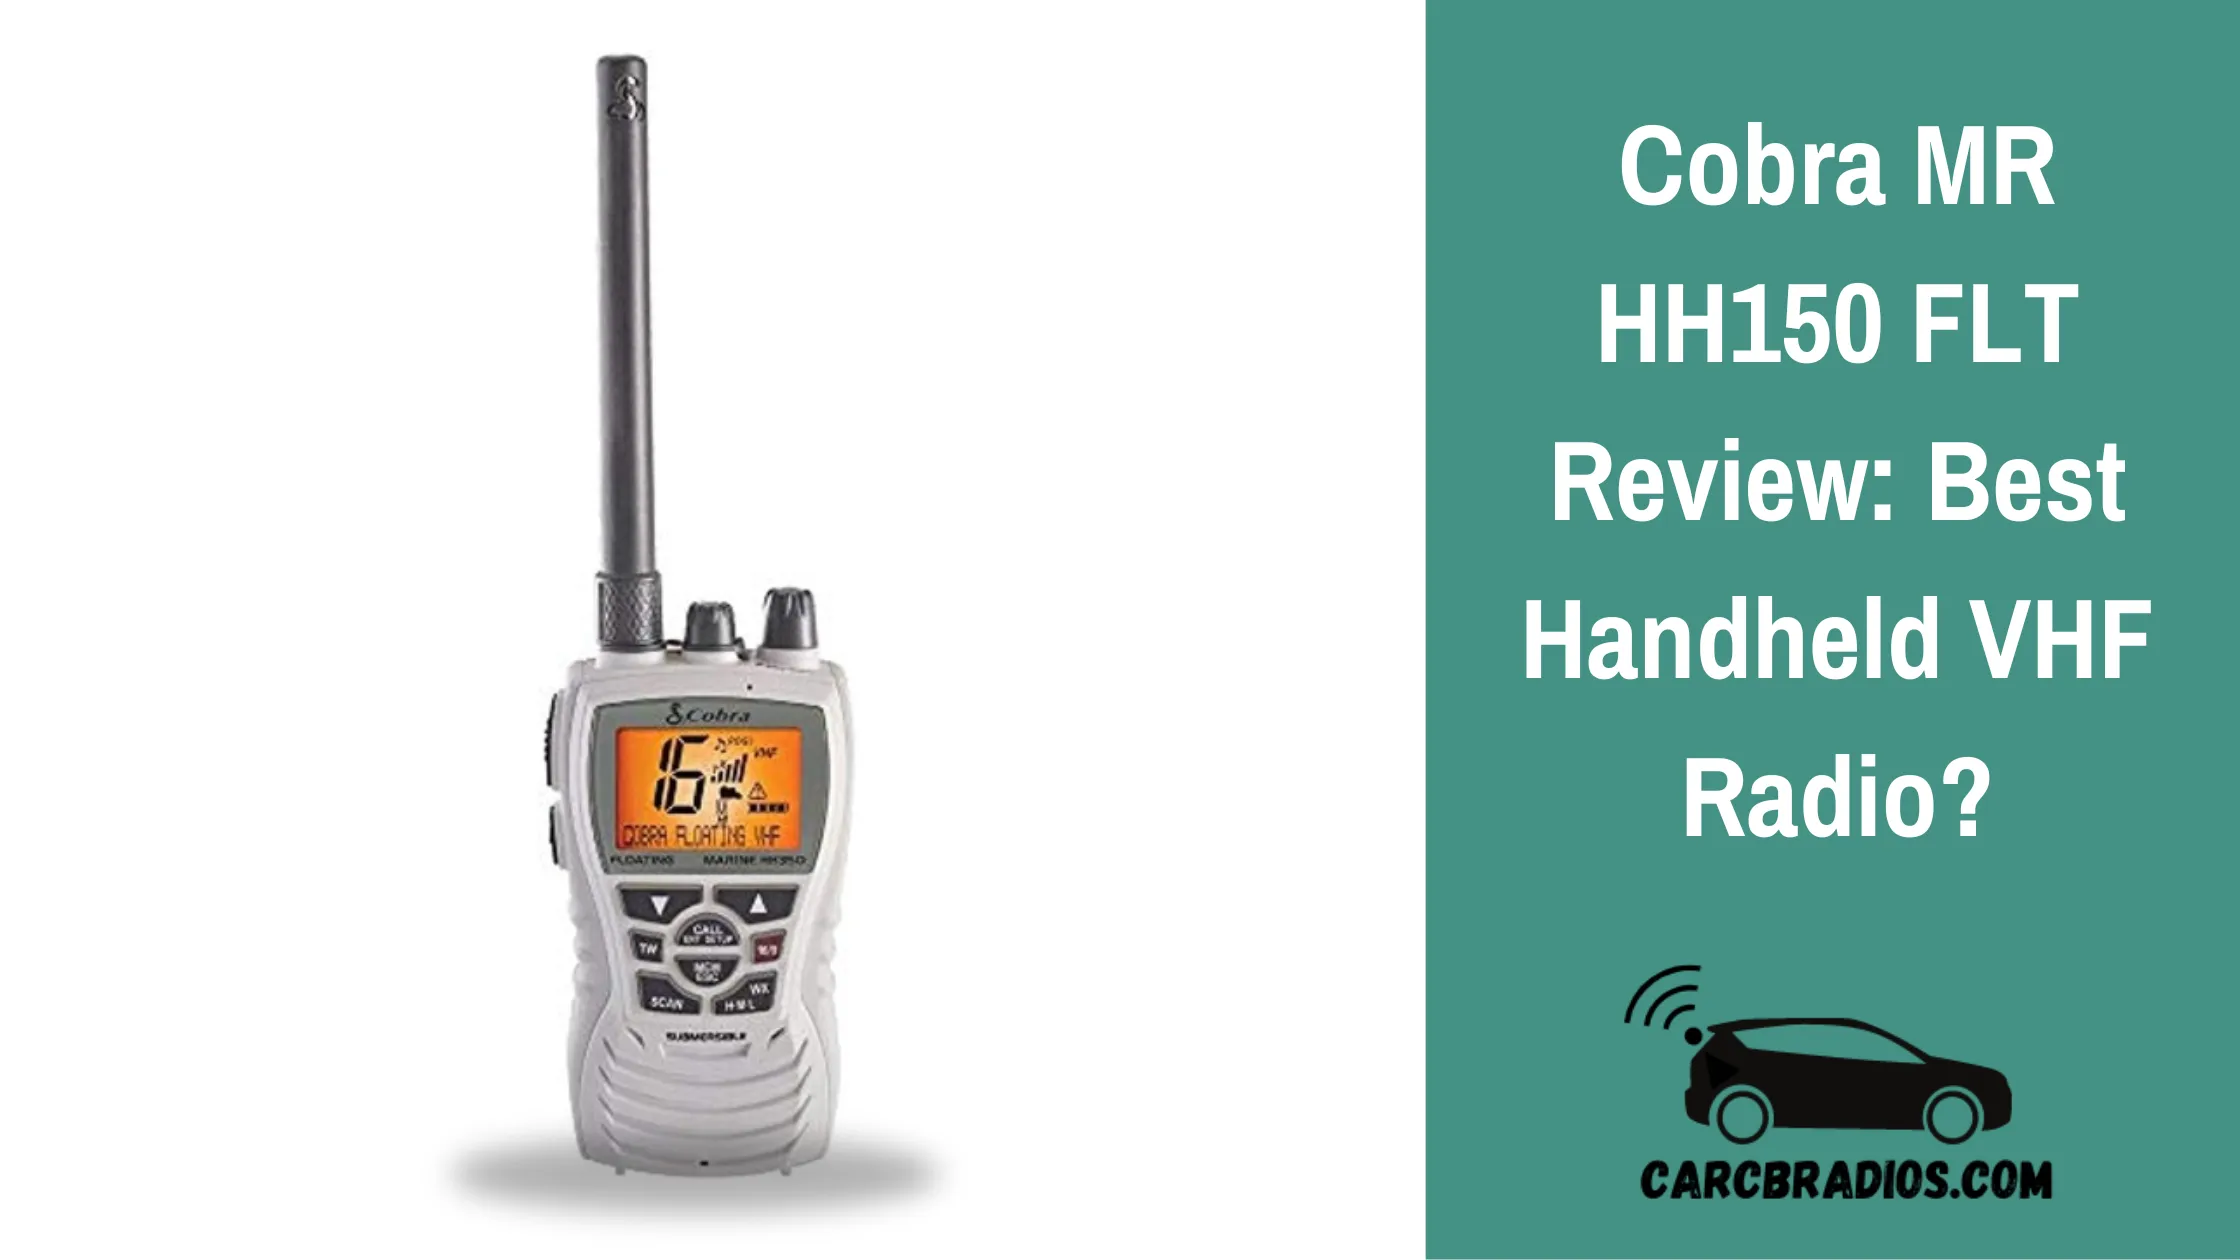 Overall, I highly recommend the Cobra MR HH150 FLT to any boater in need of a reliable marine radio. Its long-range capabilities, waterproof and submersible design, and advanced features make it a top choice for anyone looking to stay connected while out on the water. So why wait?